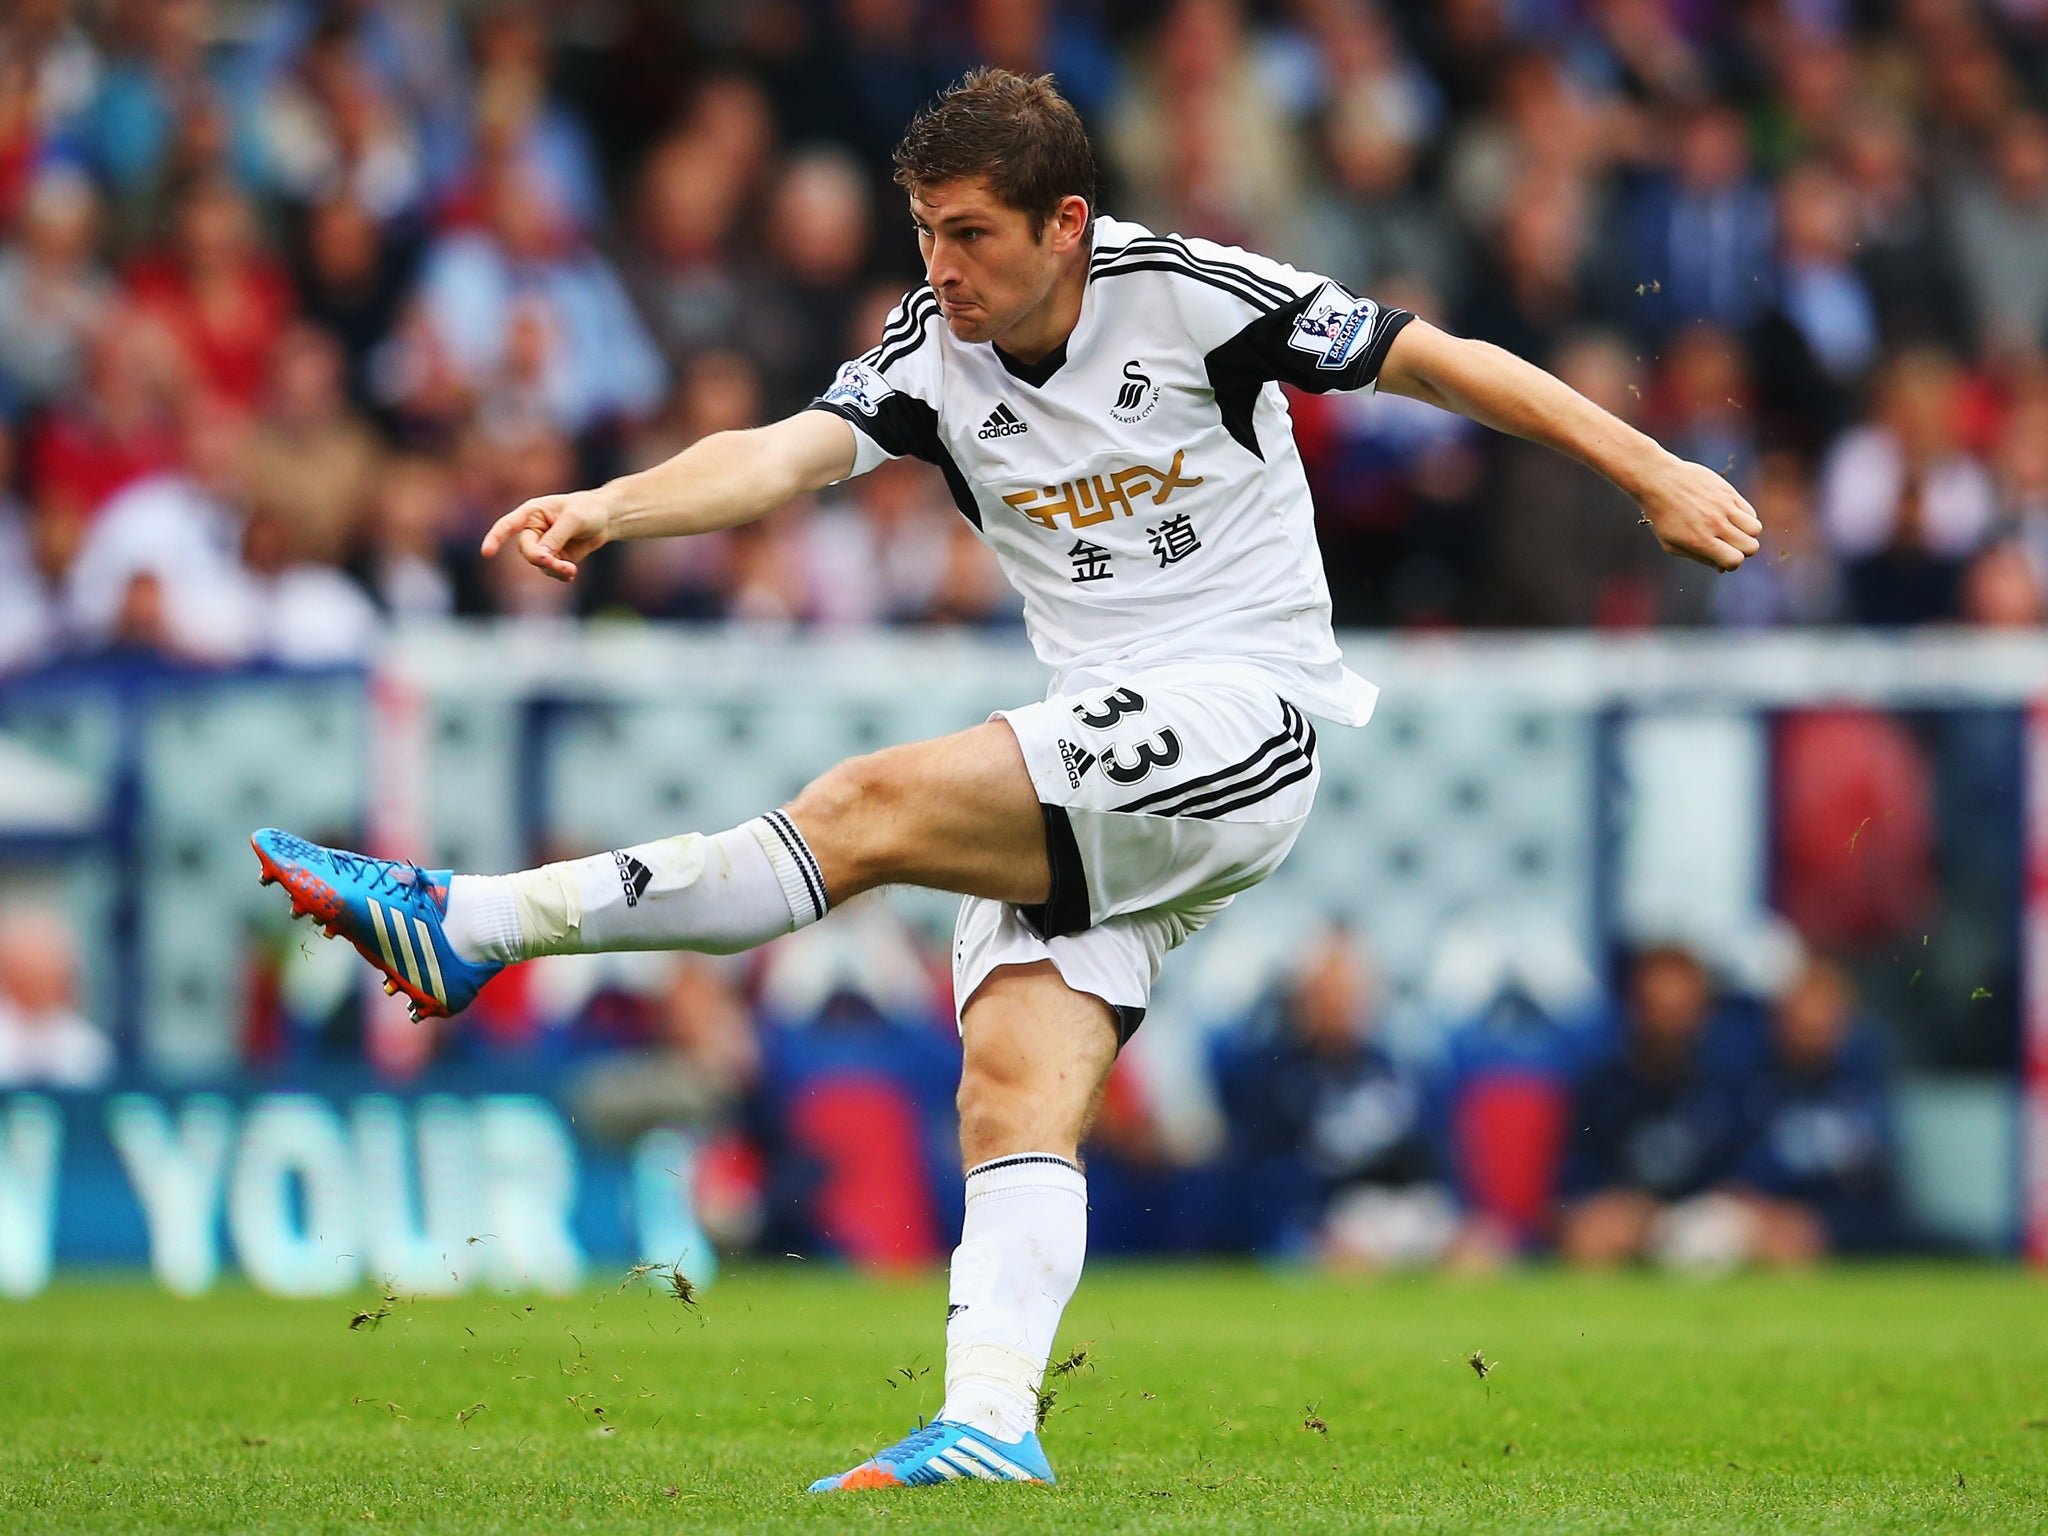 Swansea defender Ben Davies has been ruled out for 3-4 weeks after suffering a sprained ankle